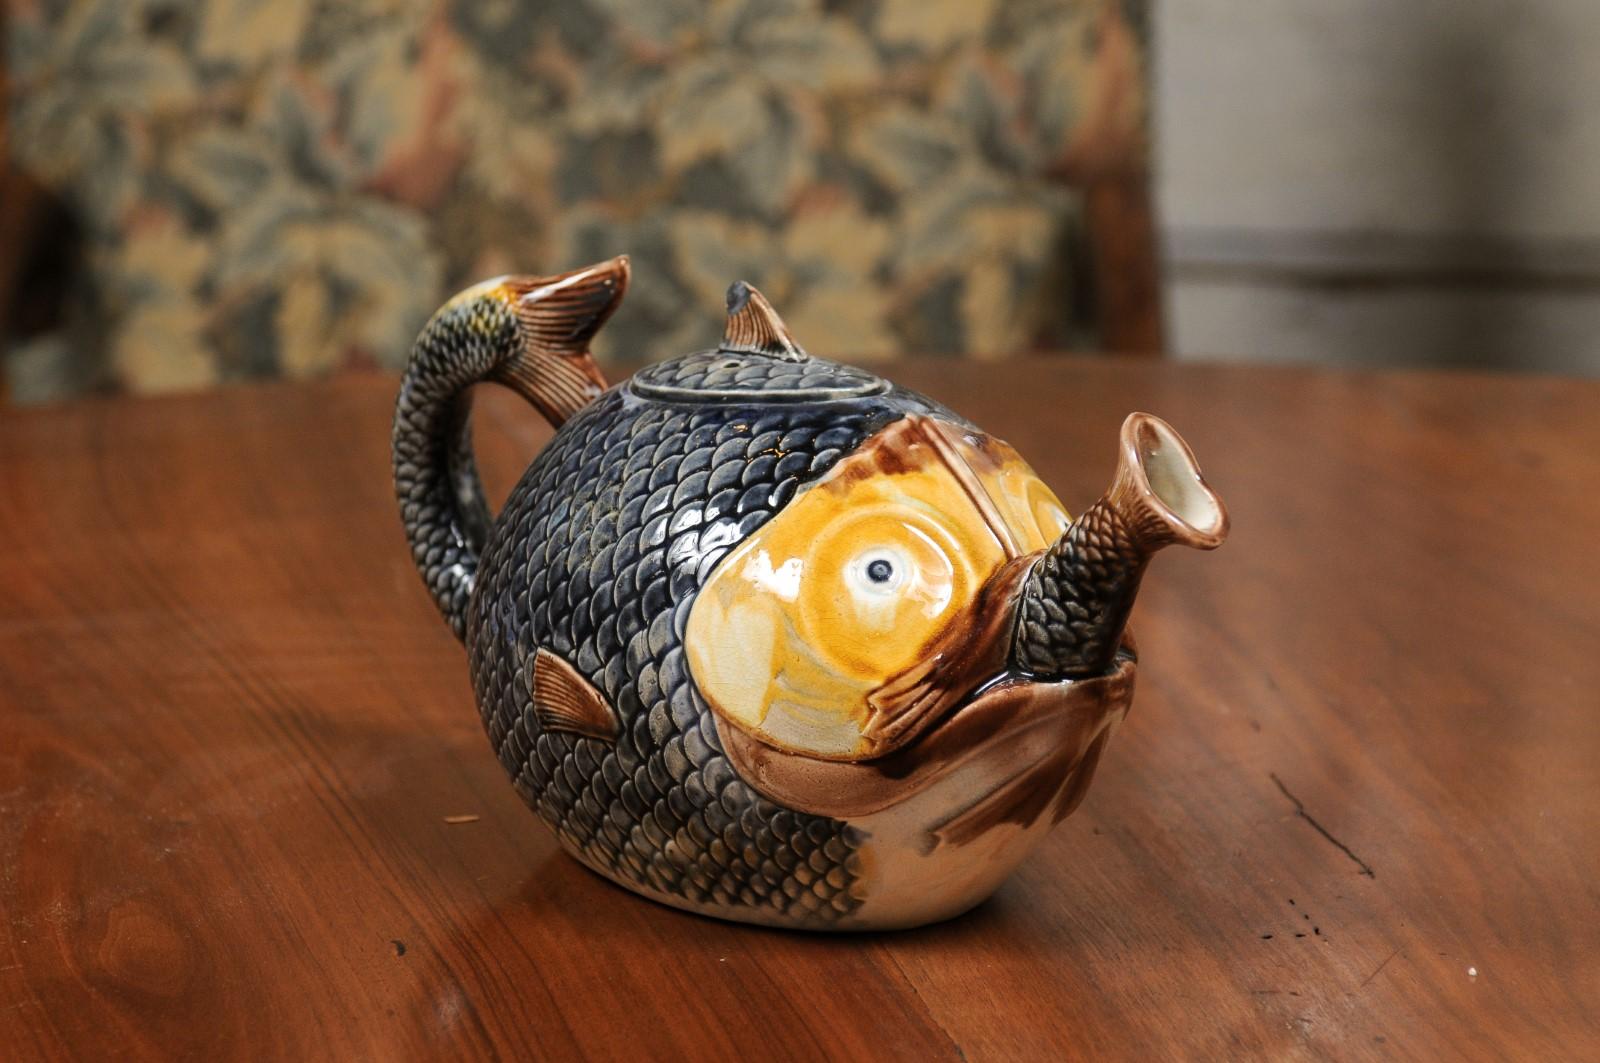 A French majolica teapot from the late 19th century depicting a fish eating another fish, with lid. Created in France during the last quarter of the 19th century, this majolica teapot attracts our attention with its unusual depiction of a fish